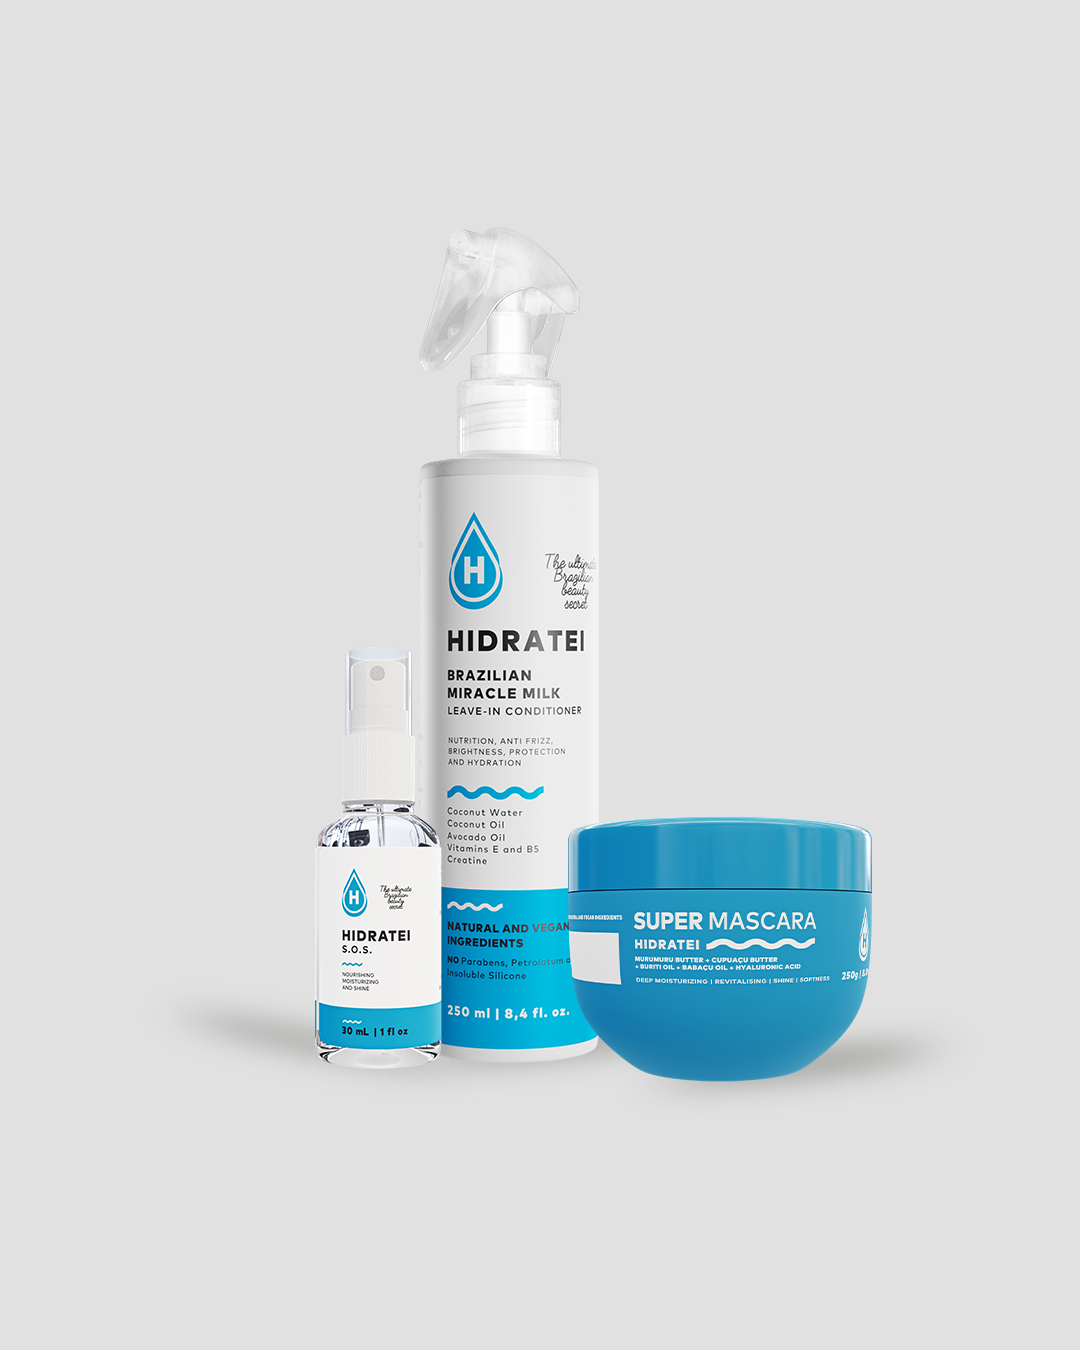 Hidratei Products: Buy 2, Get 3